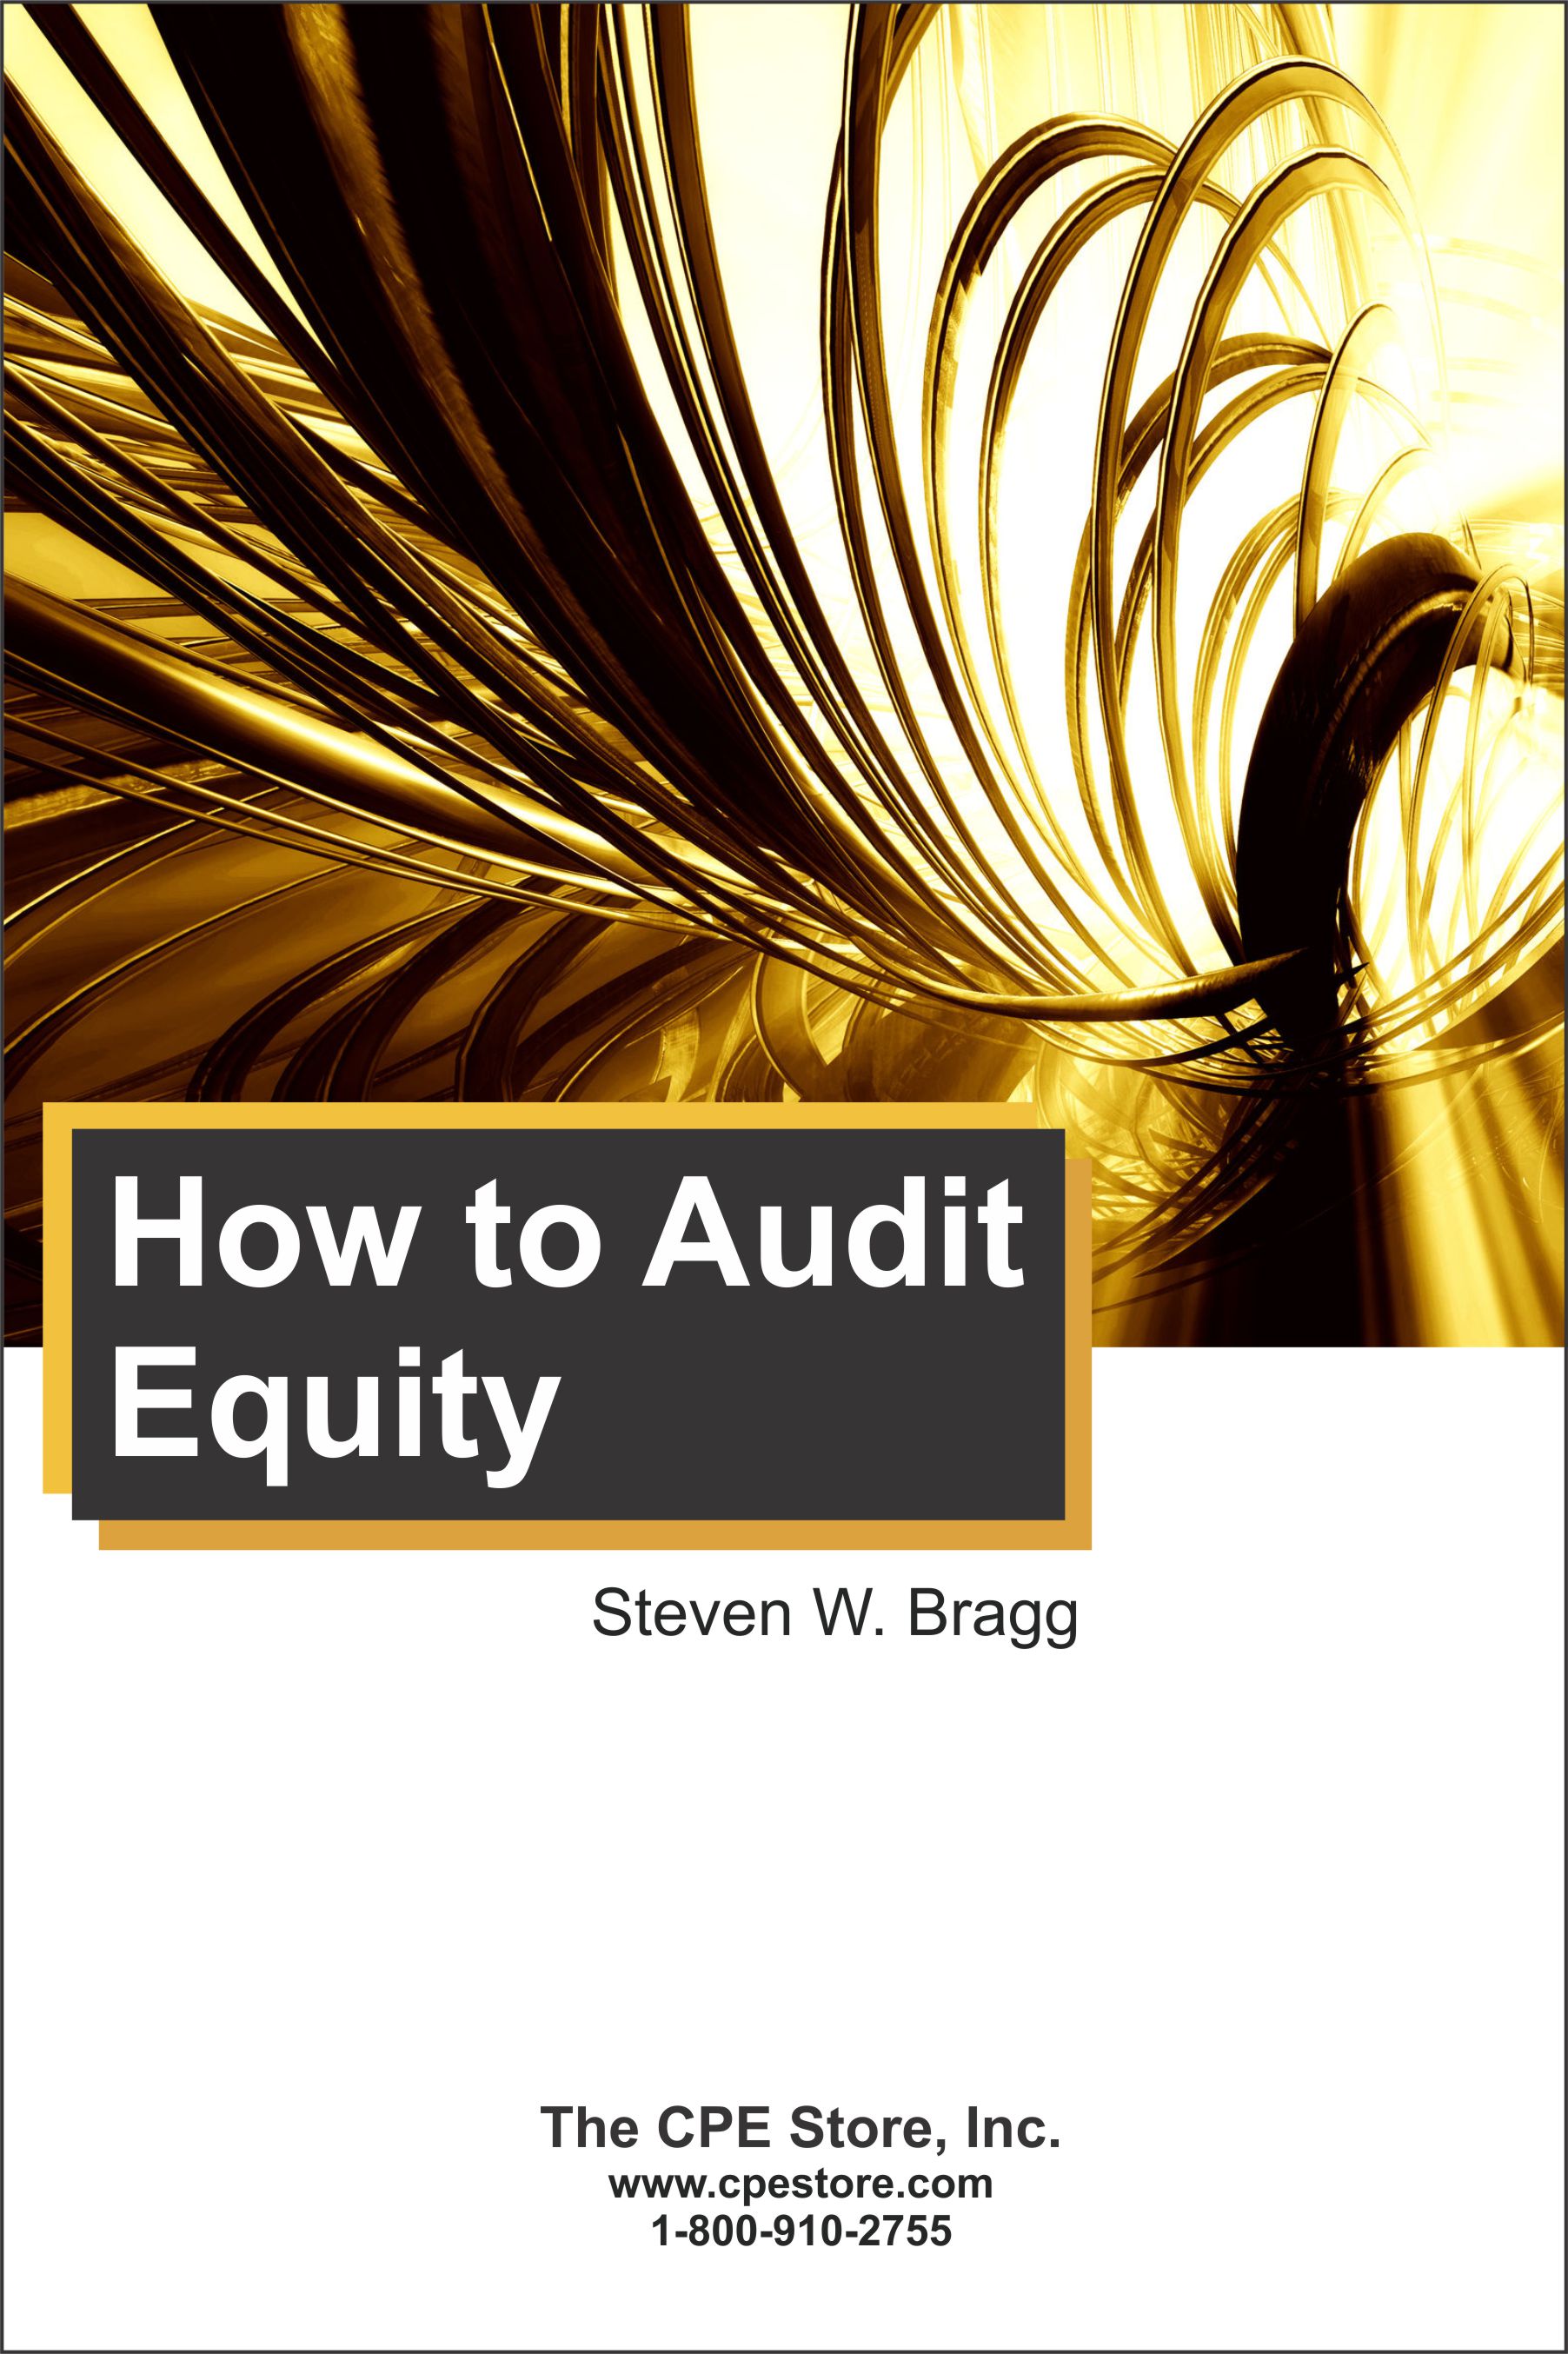 How to Audit Equity